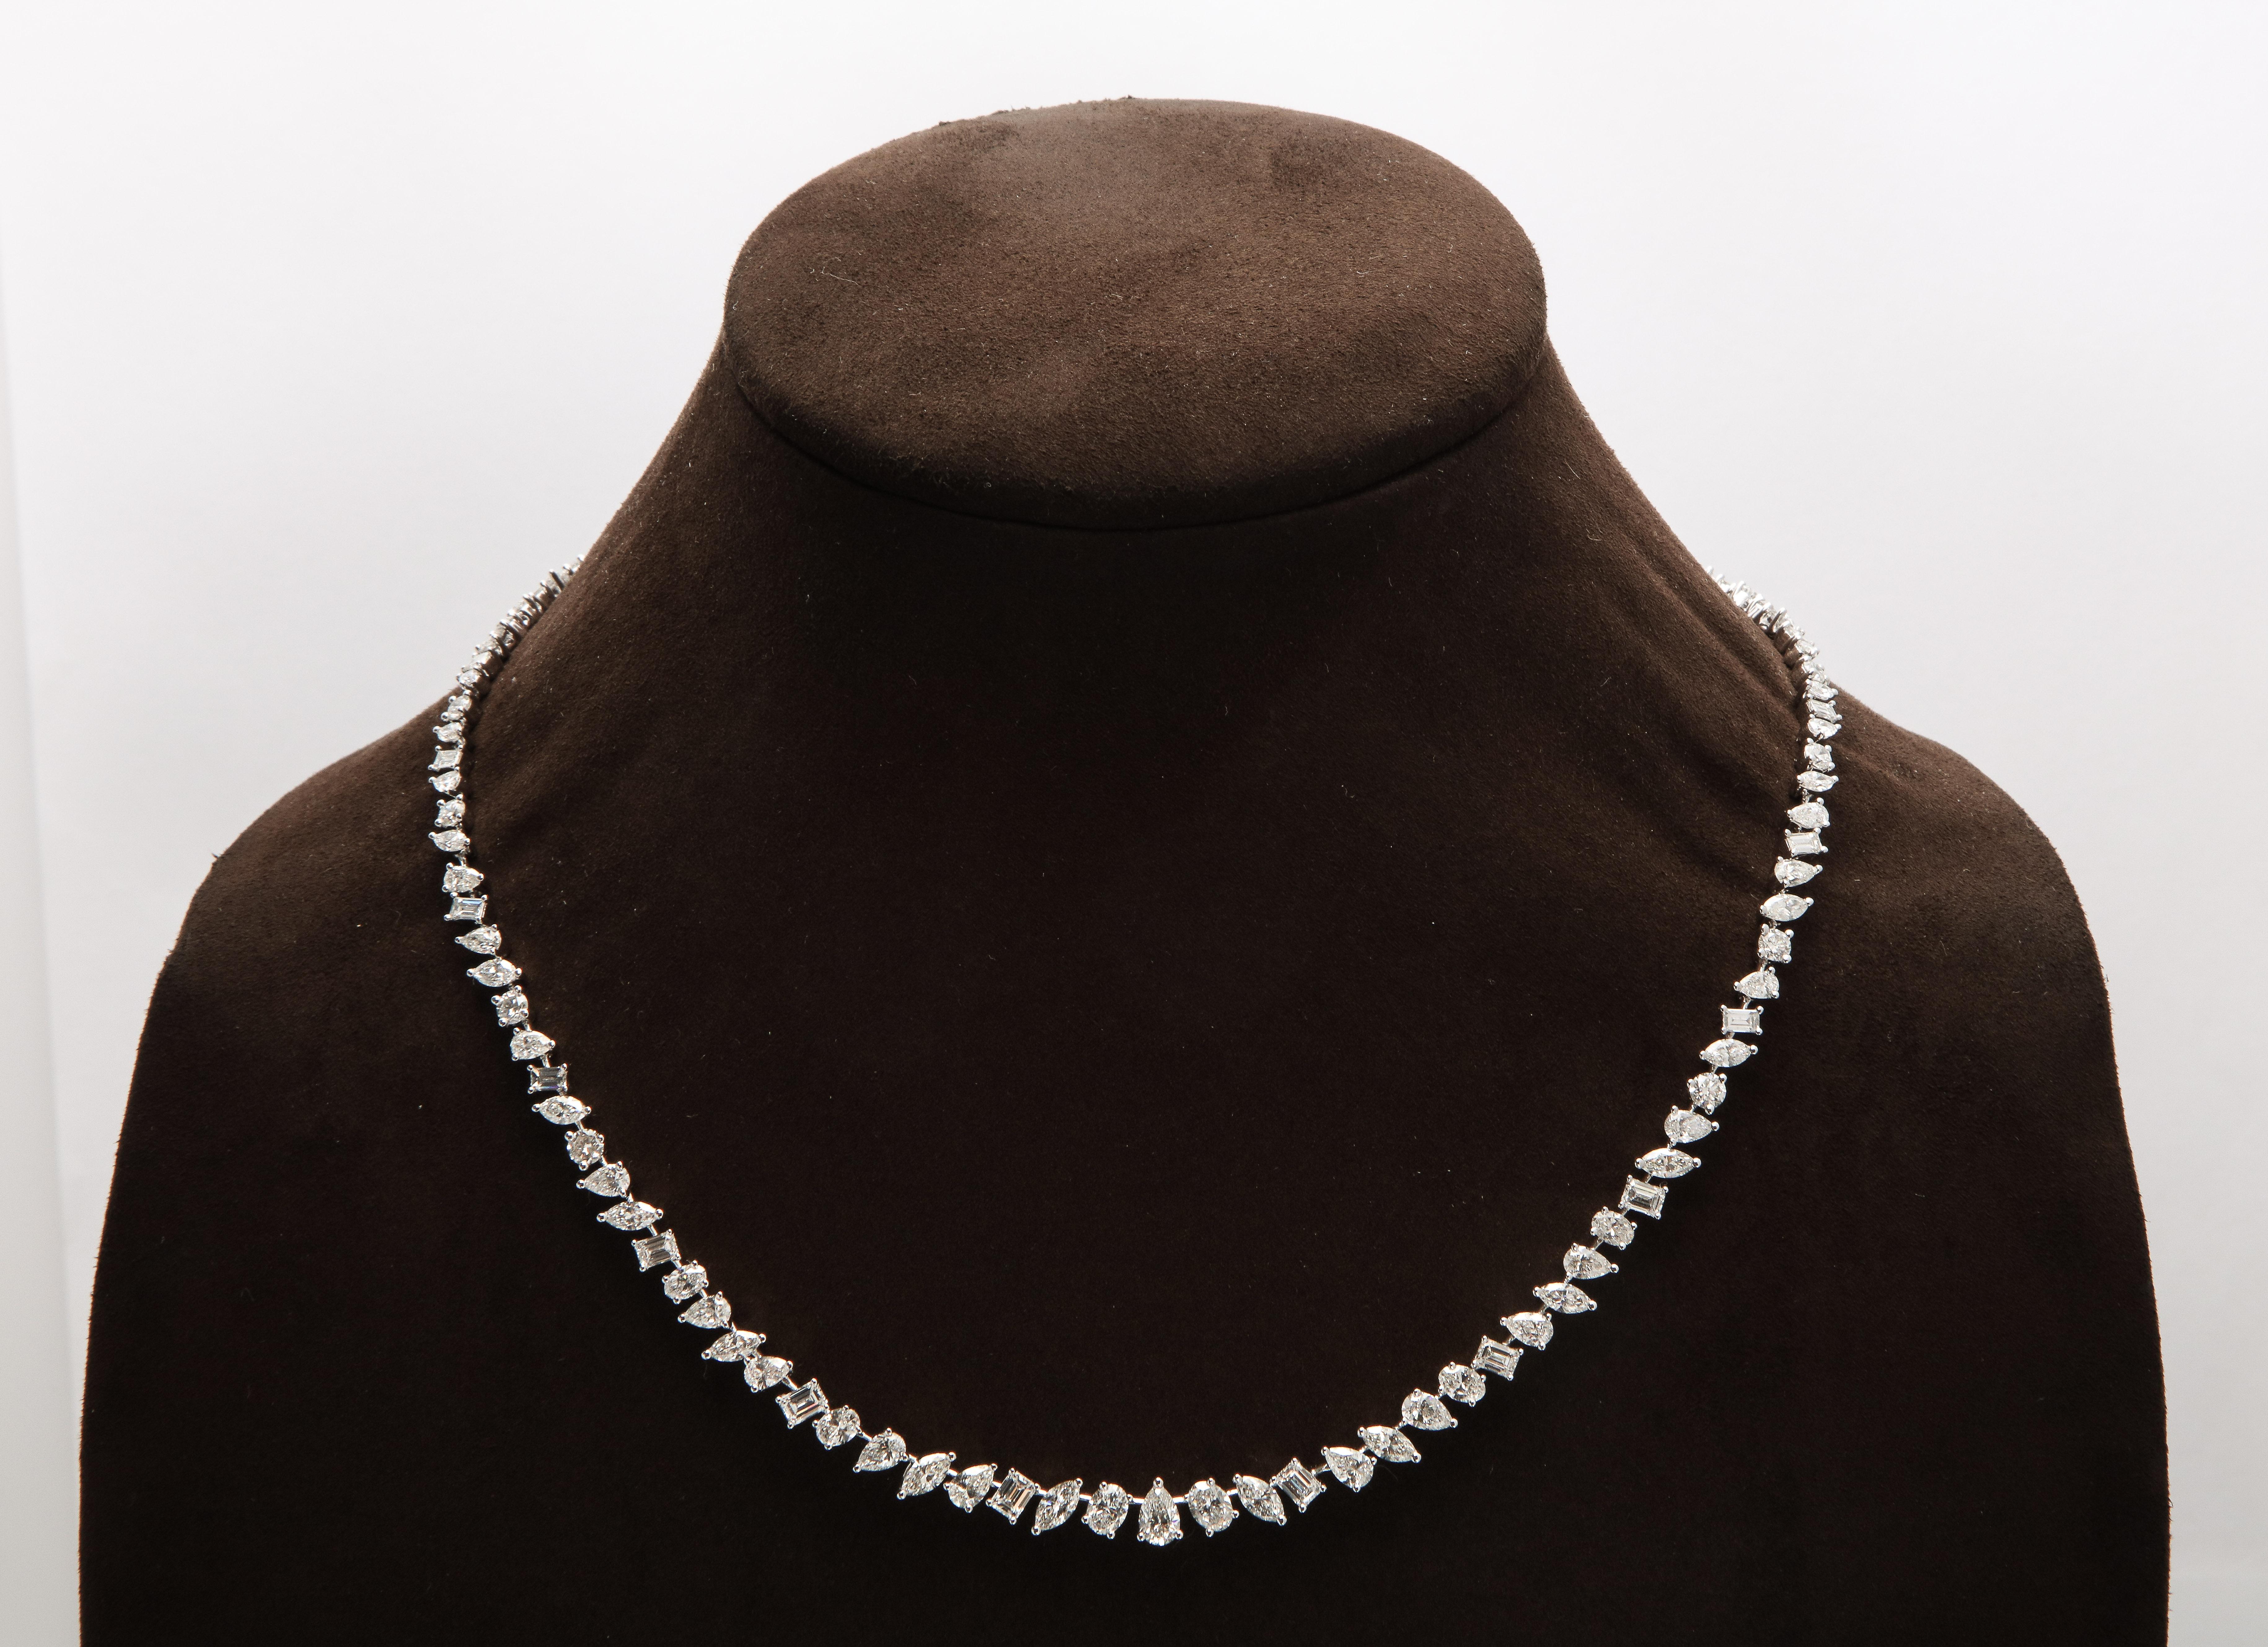 
A unique diamond necklace.

17.19 carats of oval, pear, emerald, marquise and round cut white diamonds set in 18k white gold. 

18 inch length with a removable piece to wear at 16 inches. 

This necklace can be dressed up or down, perfect for a